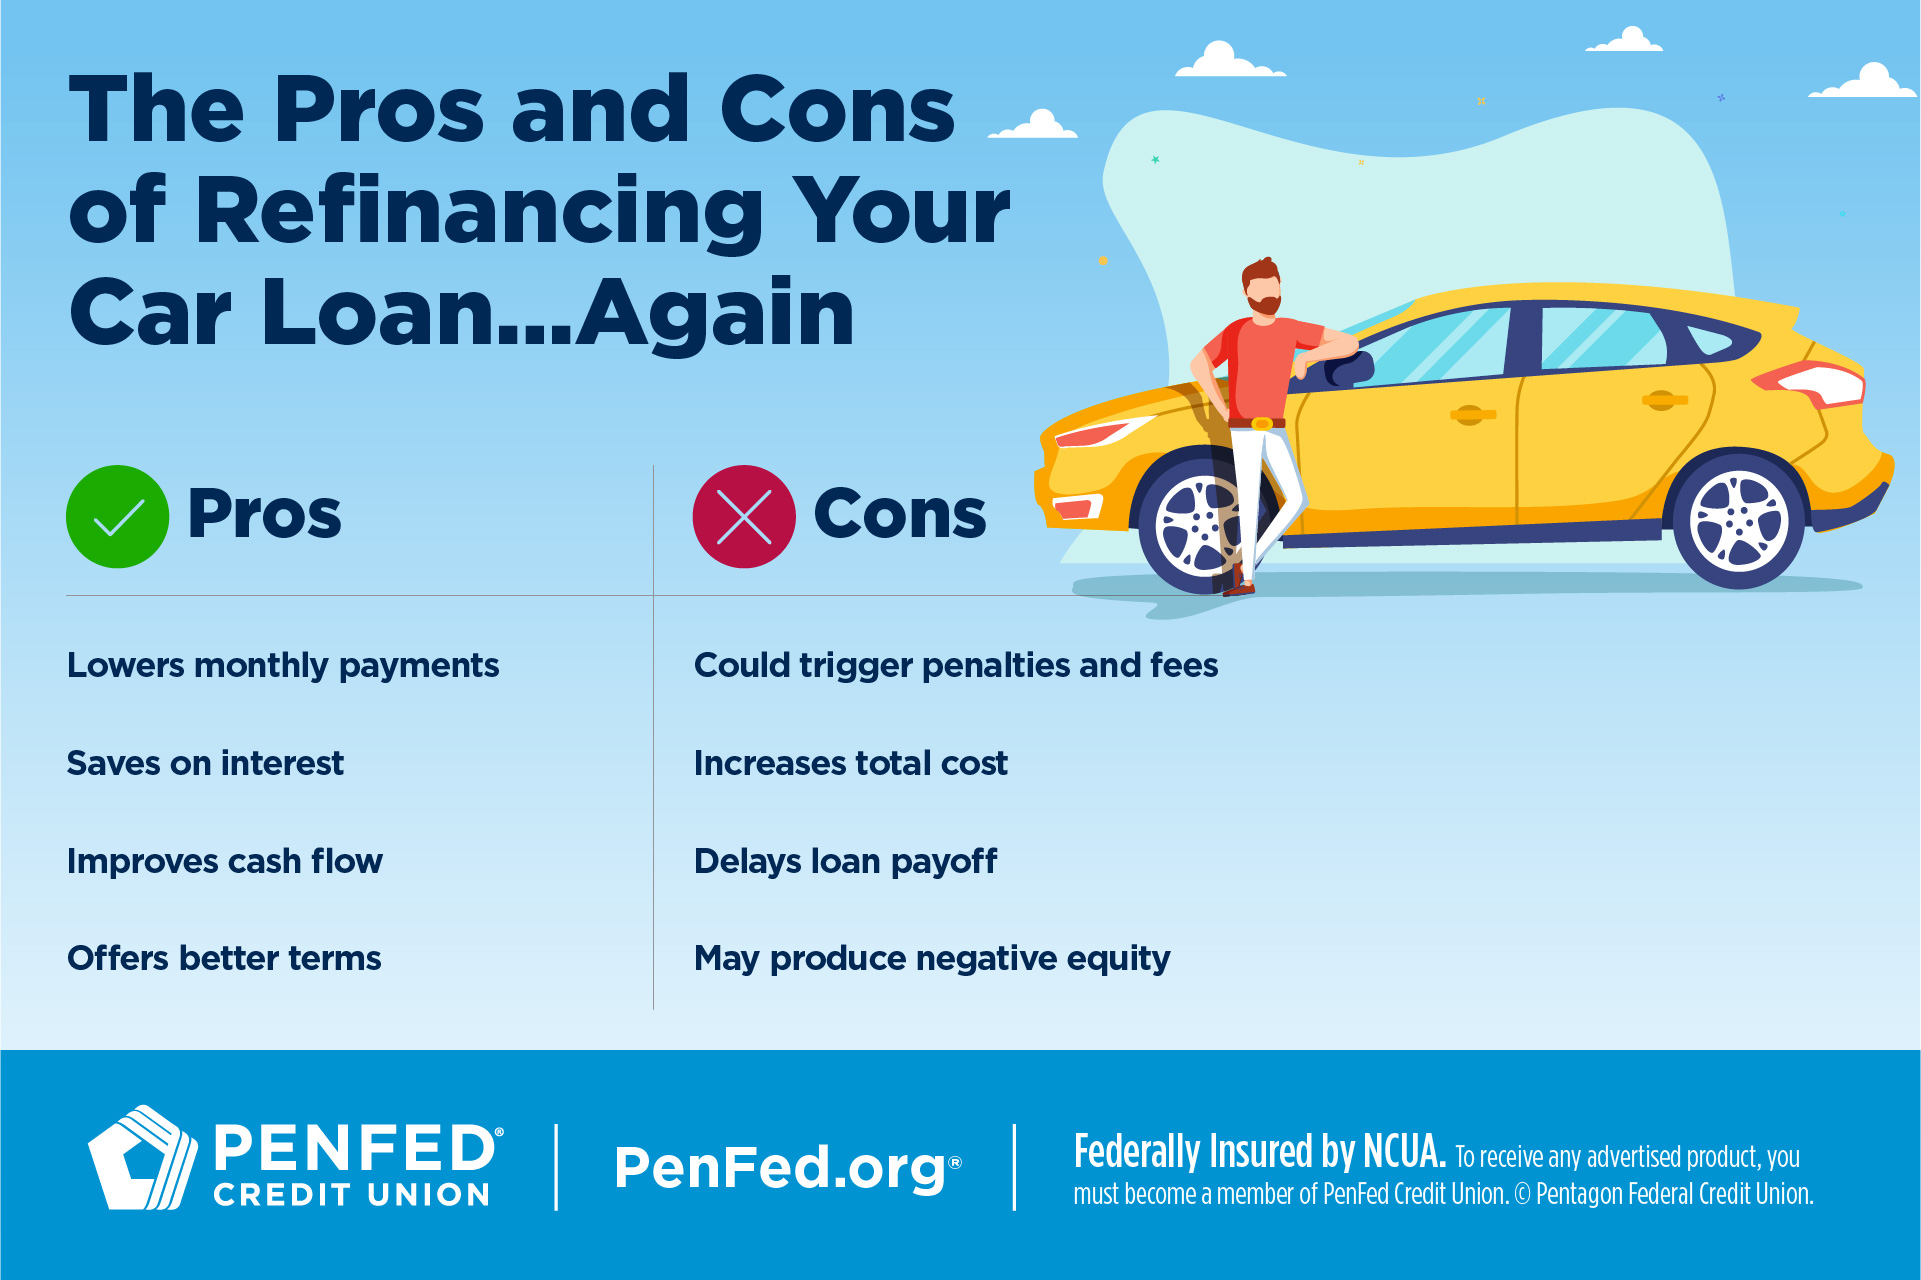 How Many Times Can You Refinance a Car Loan?